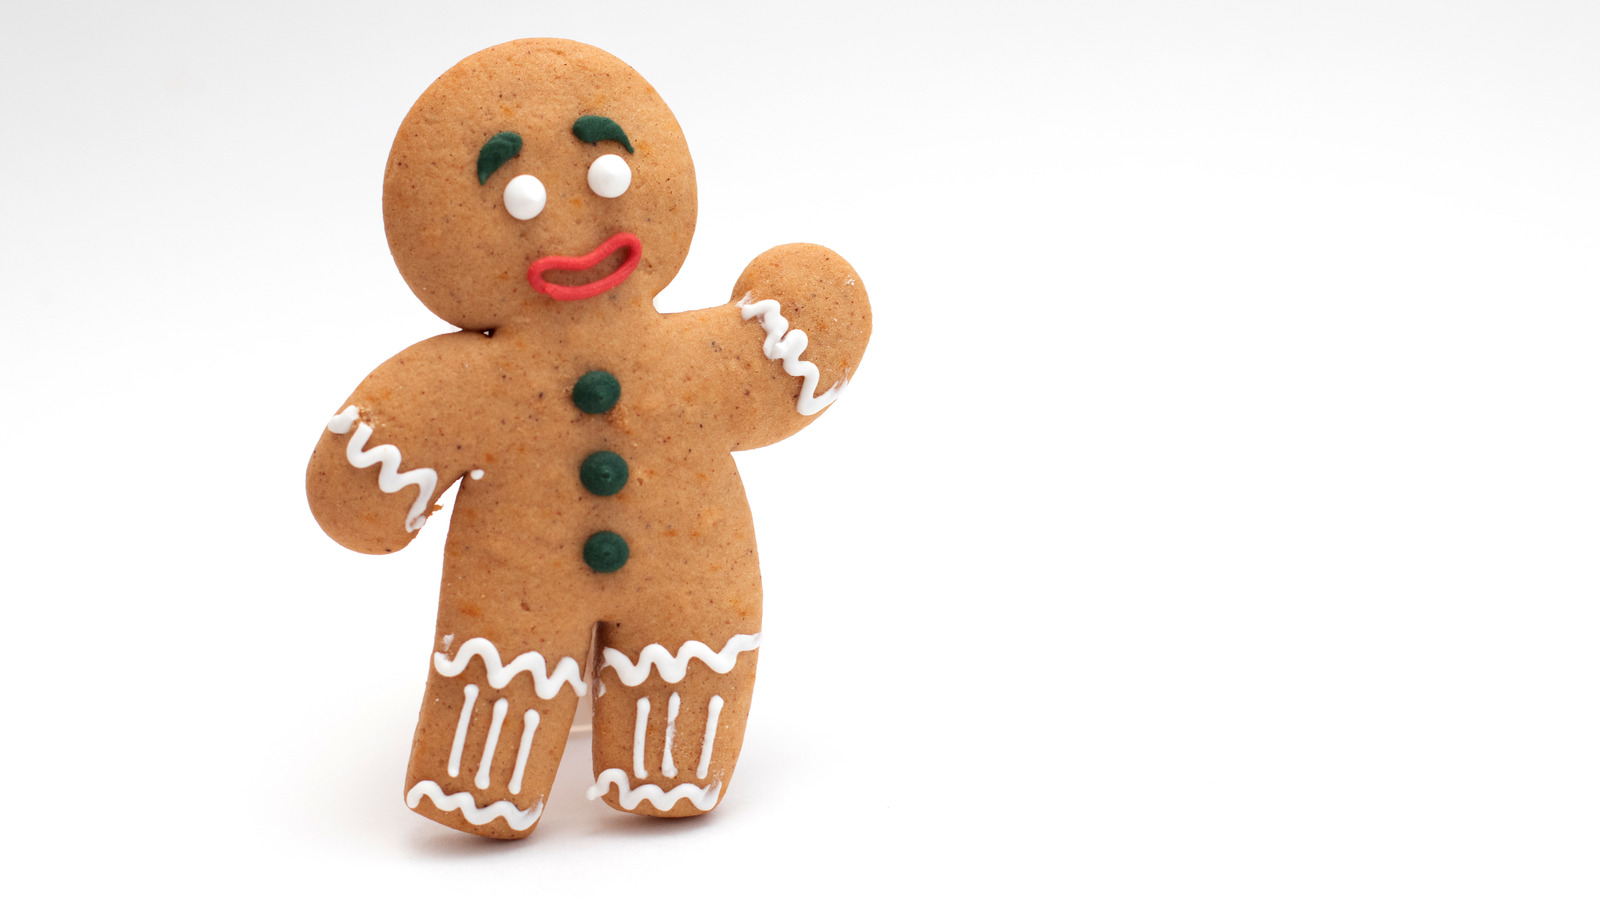 Aldi's Gingerbread Men Shaped Mug Toppers Are Back For The Holidays